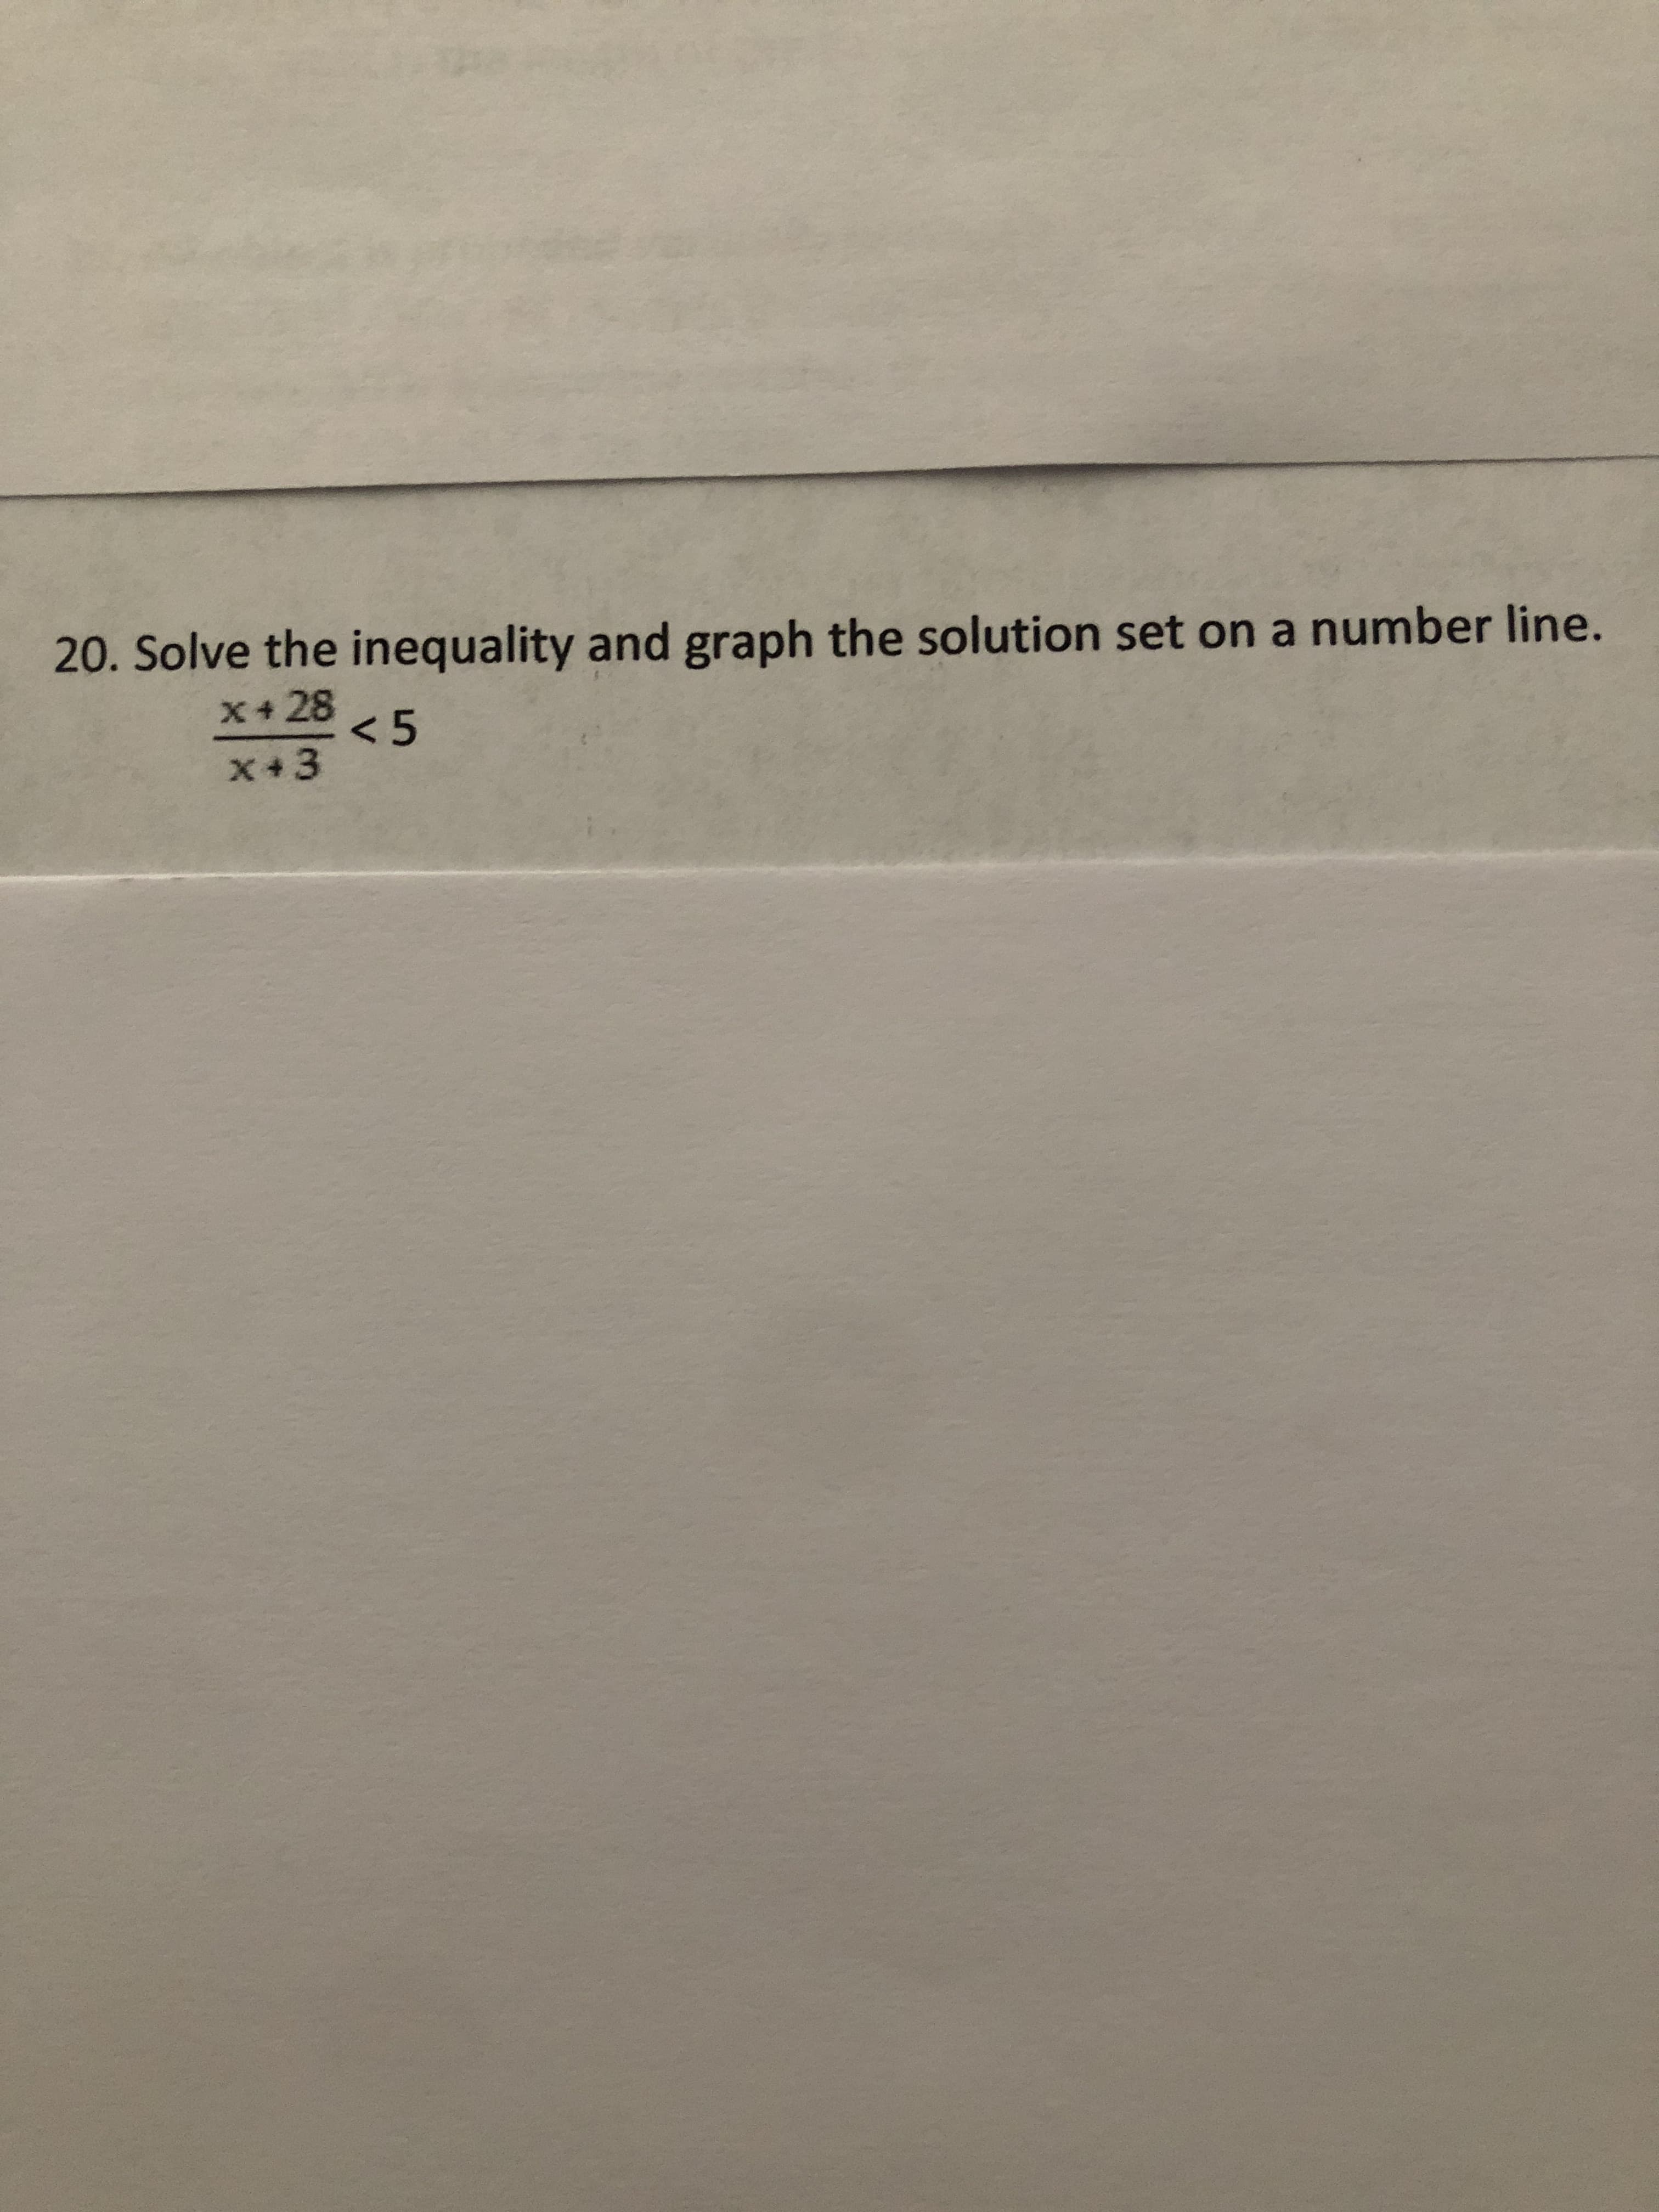 20. Solve the inequality and graph the solution set on a number line.
X+ 28
<5
X+3
